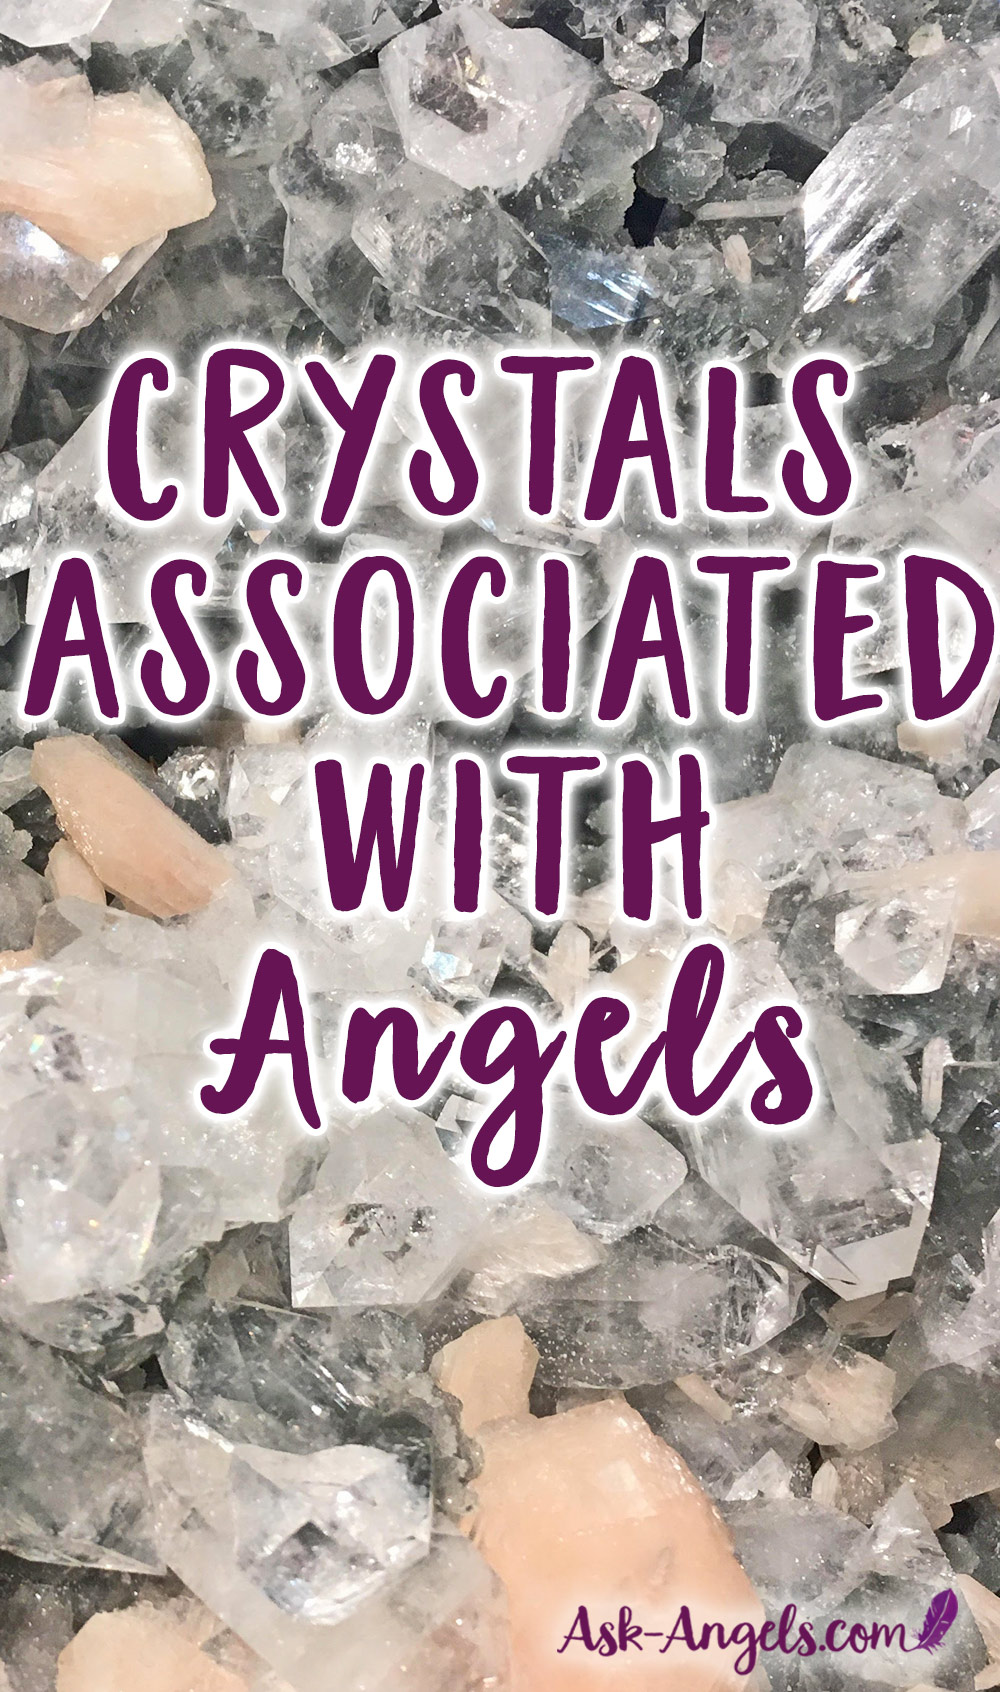 Crystals Associated With Angels